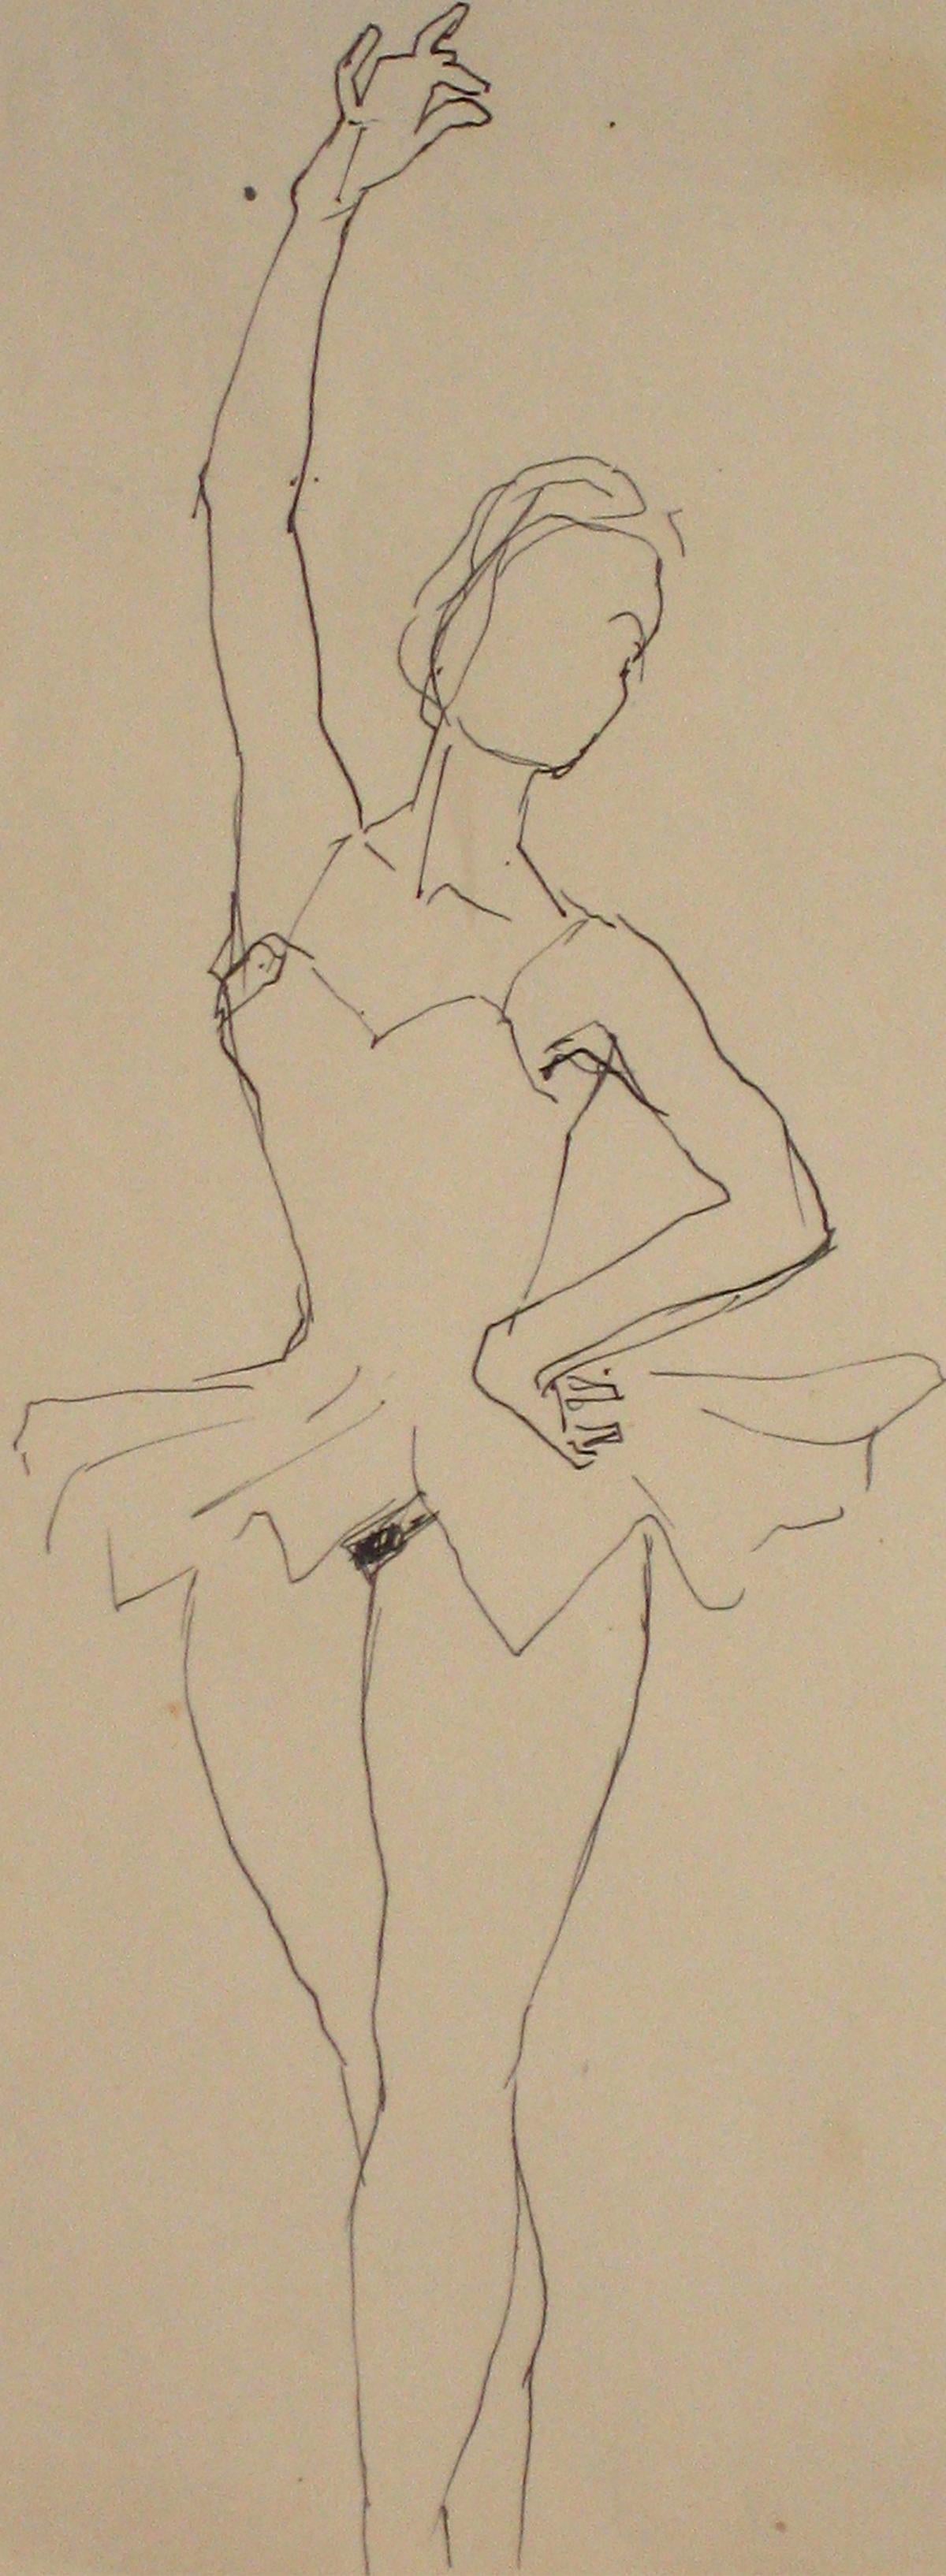 Vintage Ink Drawing of a Ballerina in Fourth Position - Art by Unknown